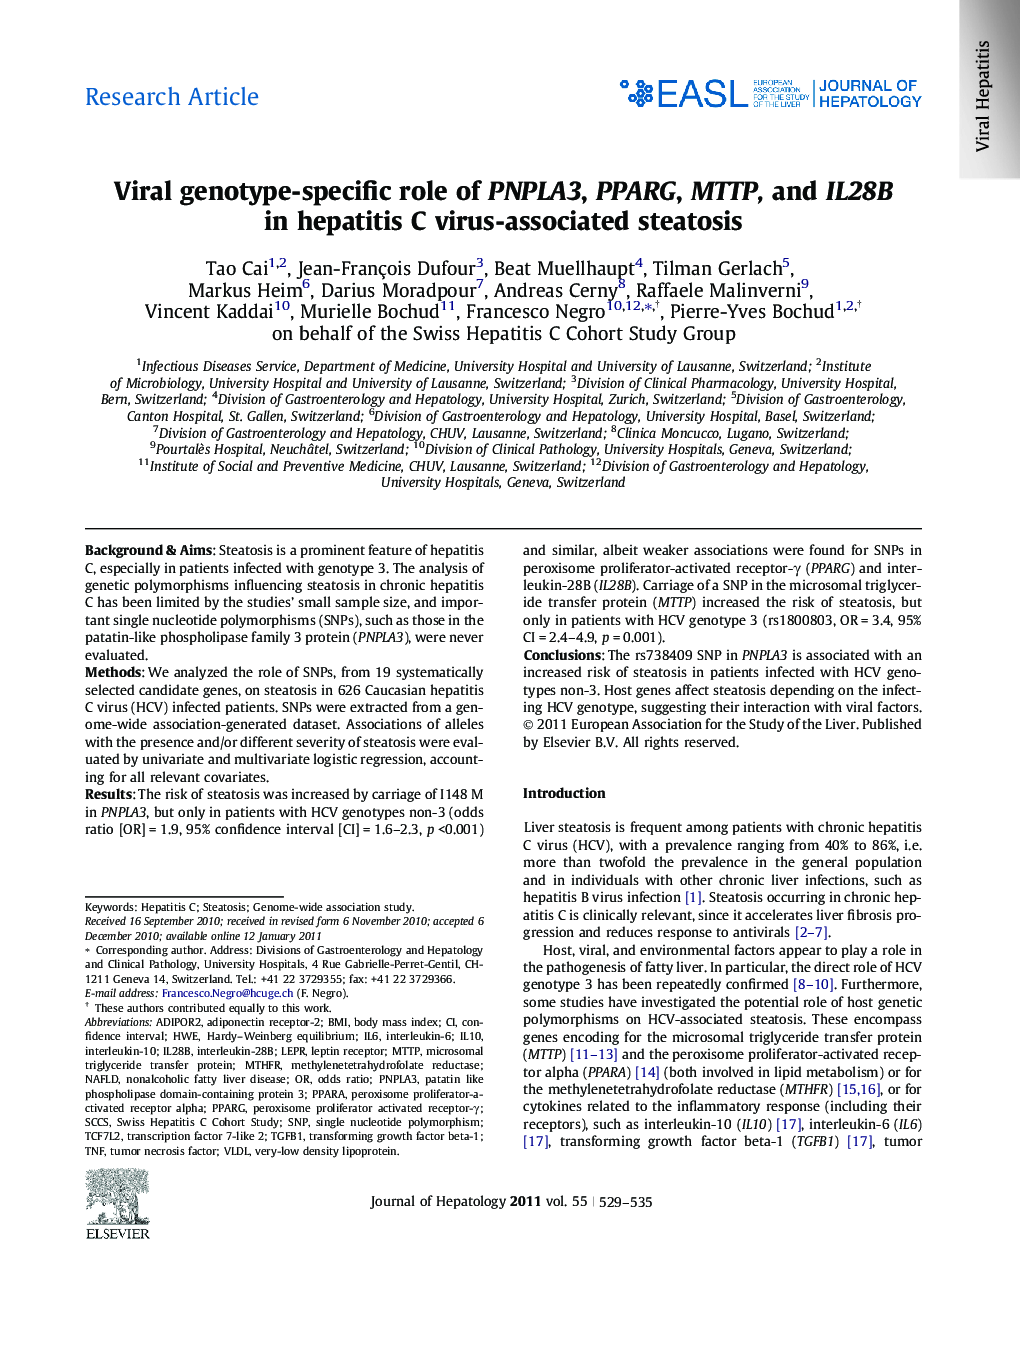 Research ArticleViral genotype-specific role of PNPLA3, PPARG, MTTP, and IL28B in hepatitis C virus-associated steatosis